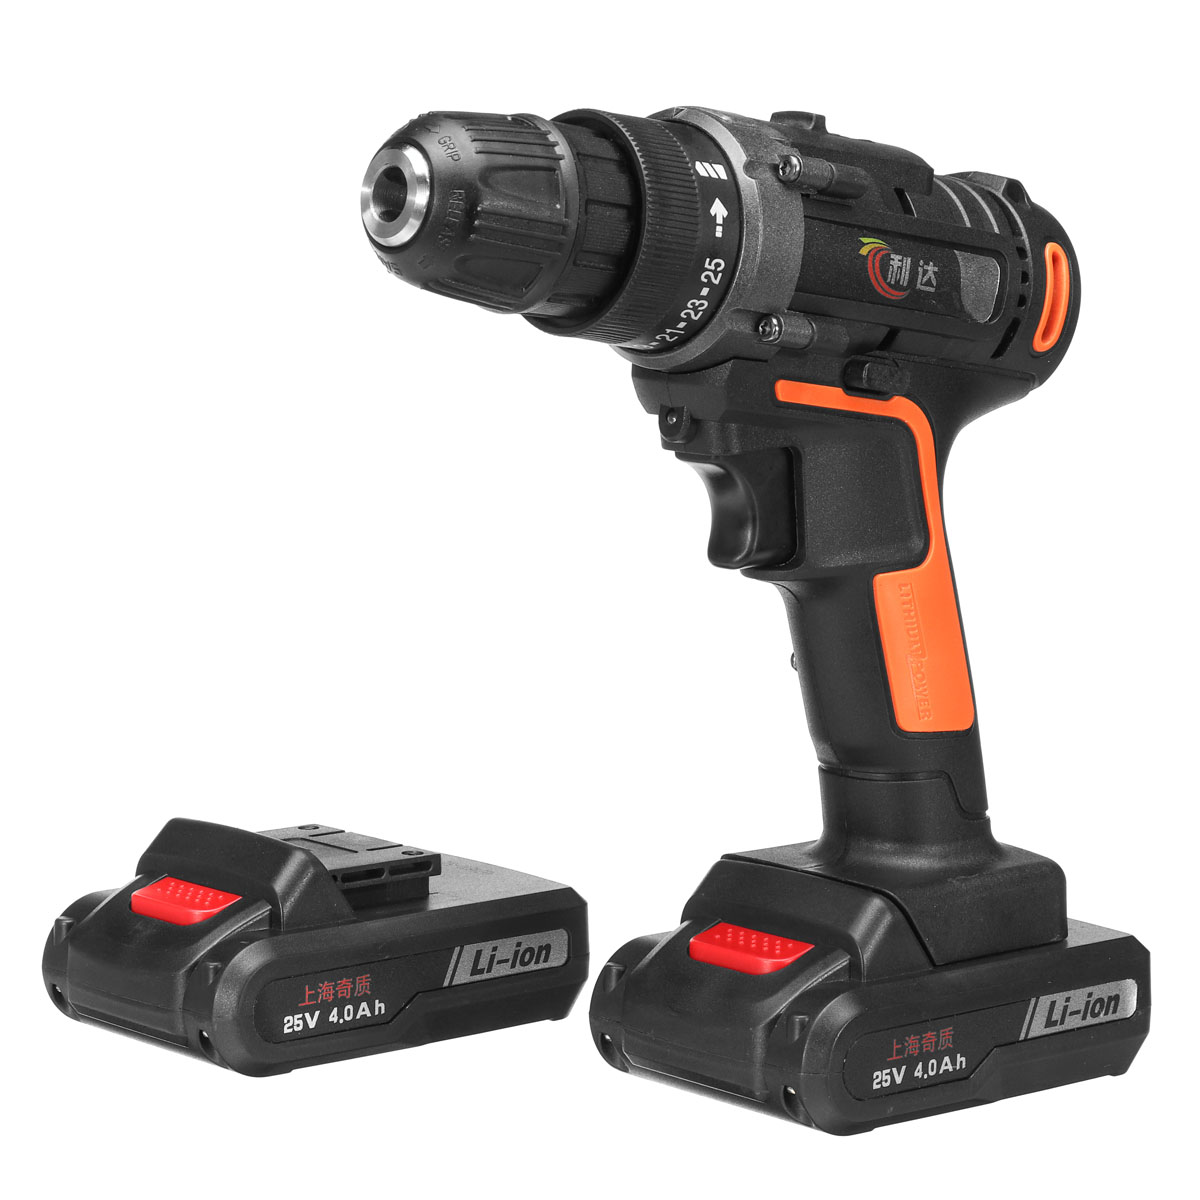 25V-4000mAh-Cordless-Rechargeable-Power-Drill-Driver-Electric-Screwdriver-with-2-Li-ion-Batteries-1396031